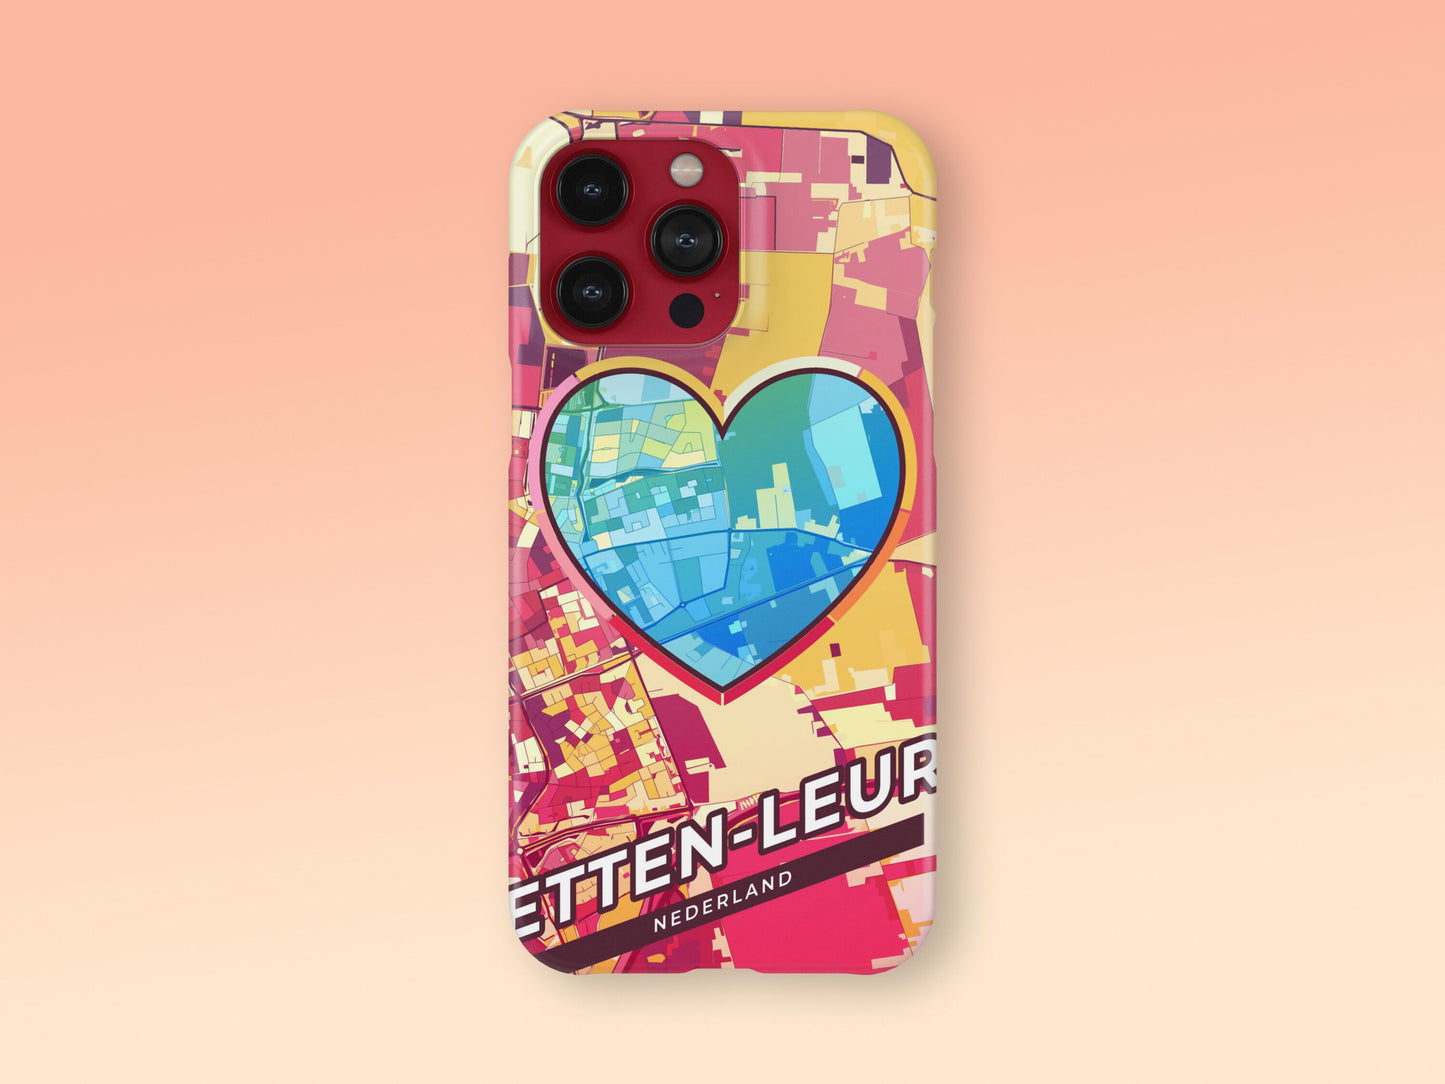 Etten-Leur Netherlands slim phone case with colorful icon. Birthday, wedding or housewarming gift. Couple match cases. 2